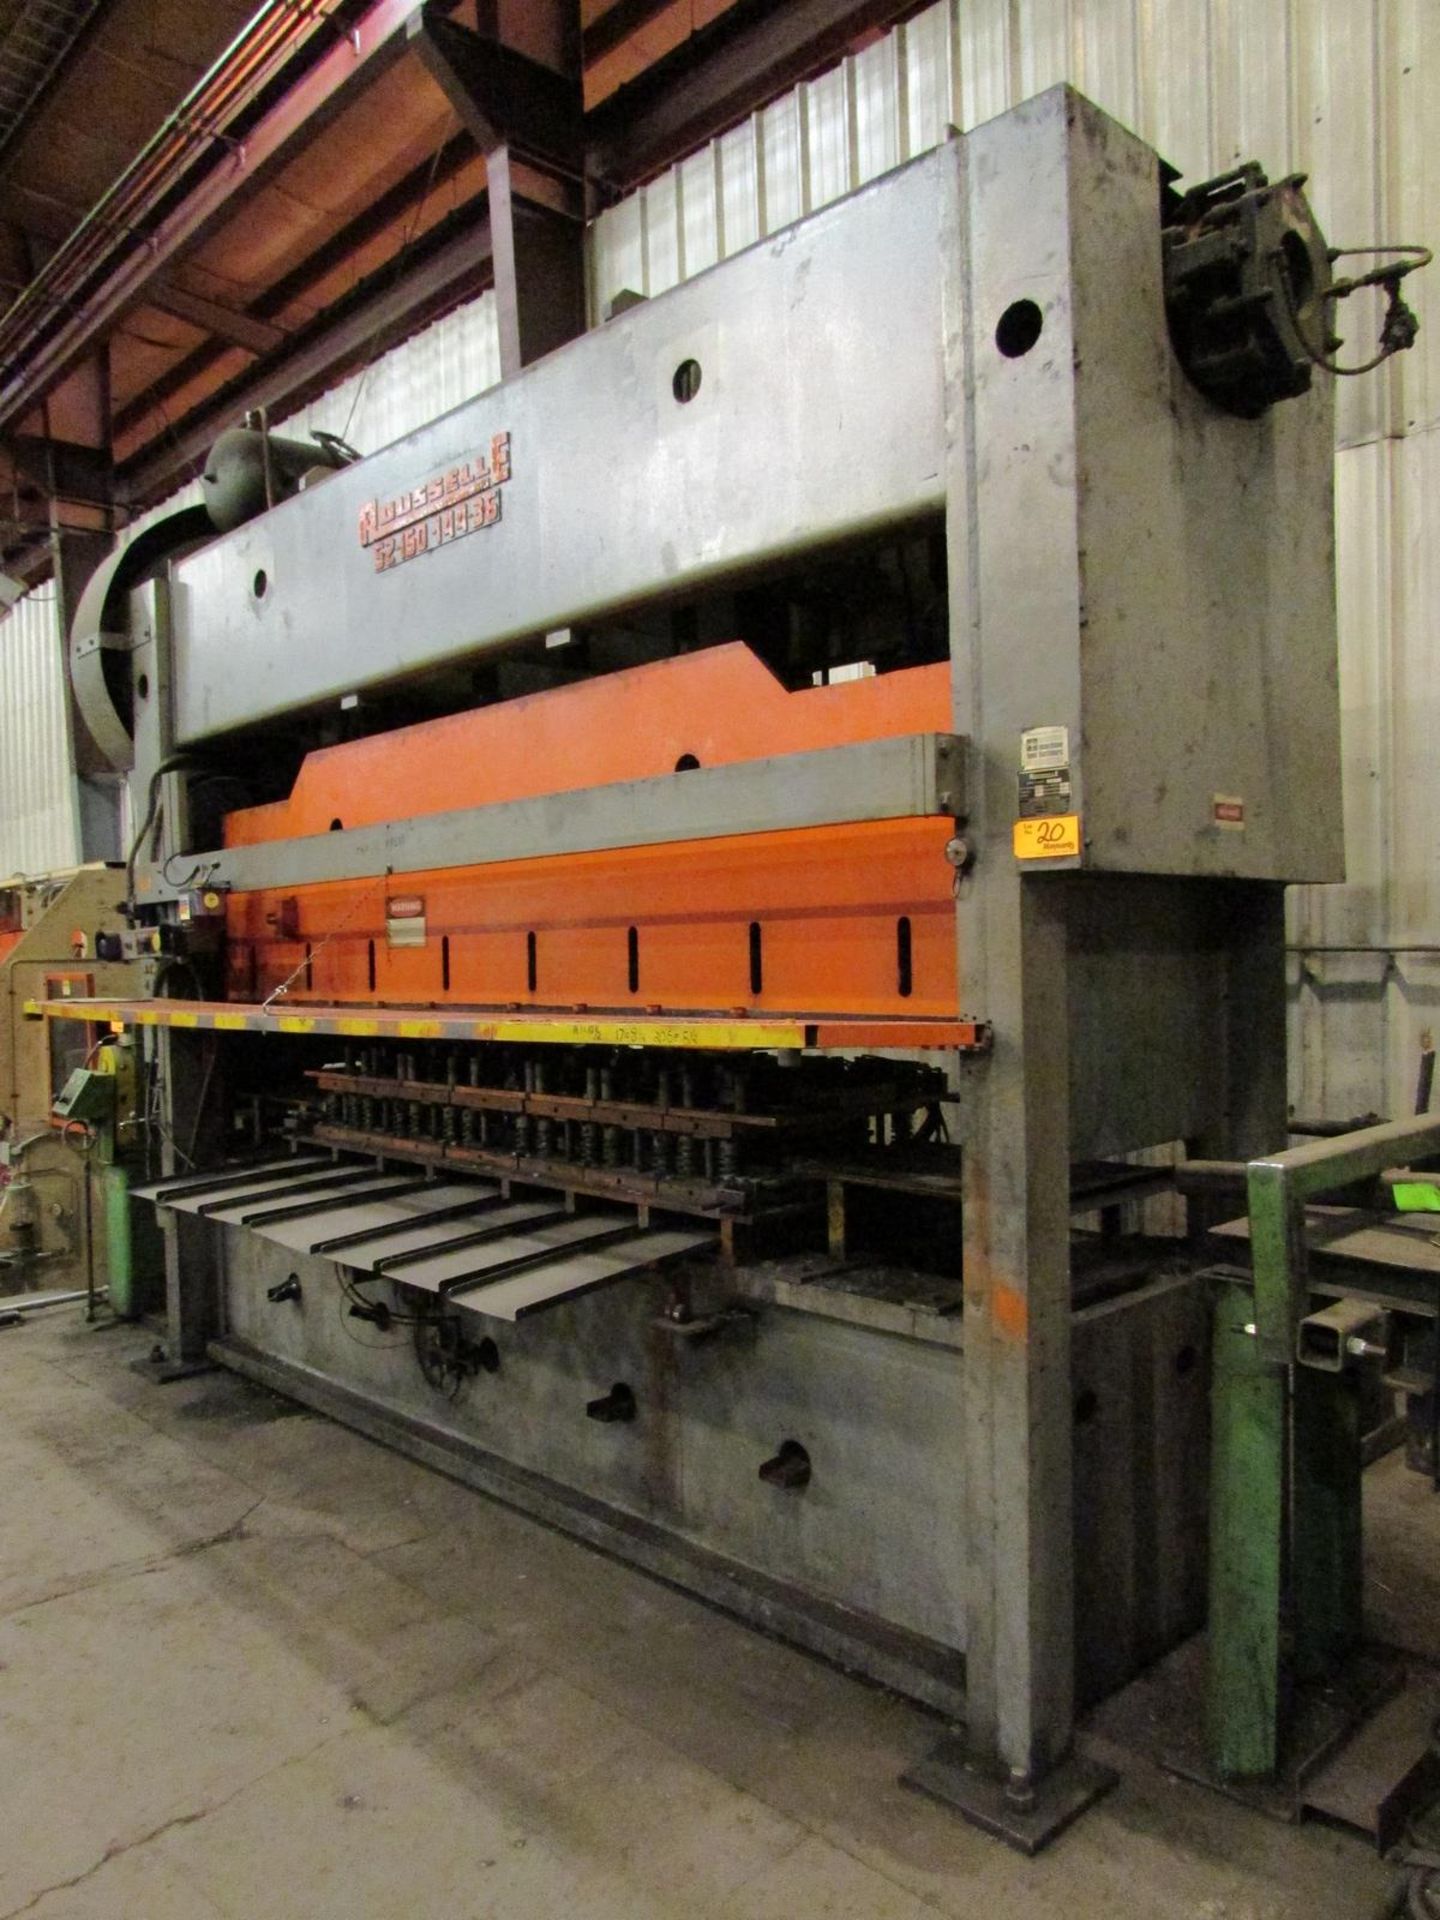 Rousselle 150 Ton Straight Side Press, Mdl: S2-150-144-36, Bed: 12' L to R, 3' F to B, 4" Stroke, - Image 2 of 13